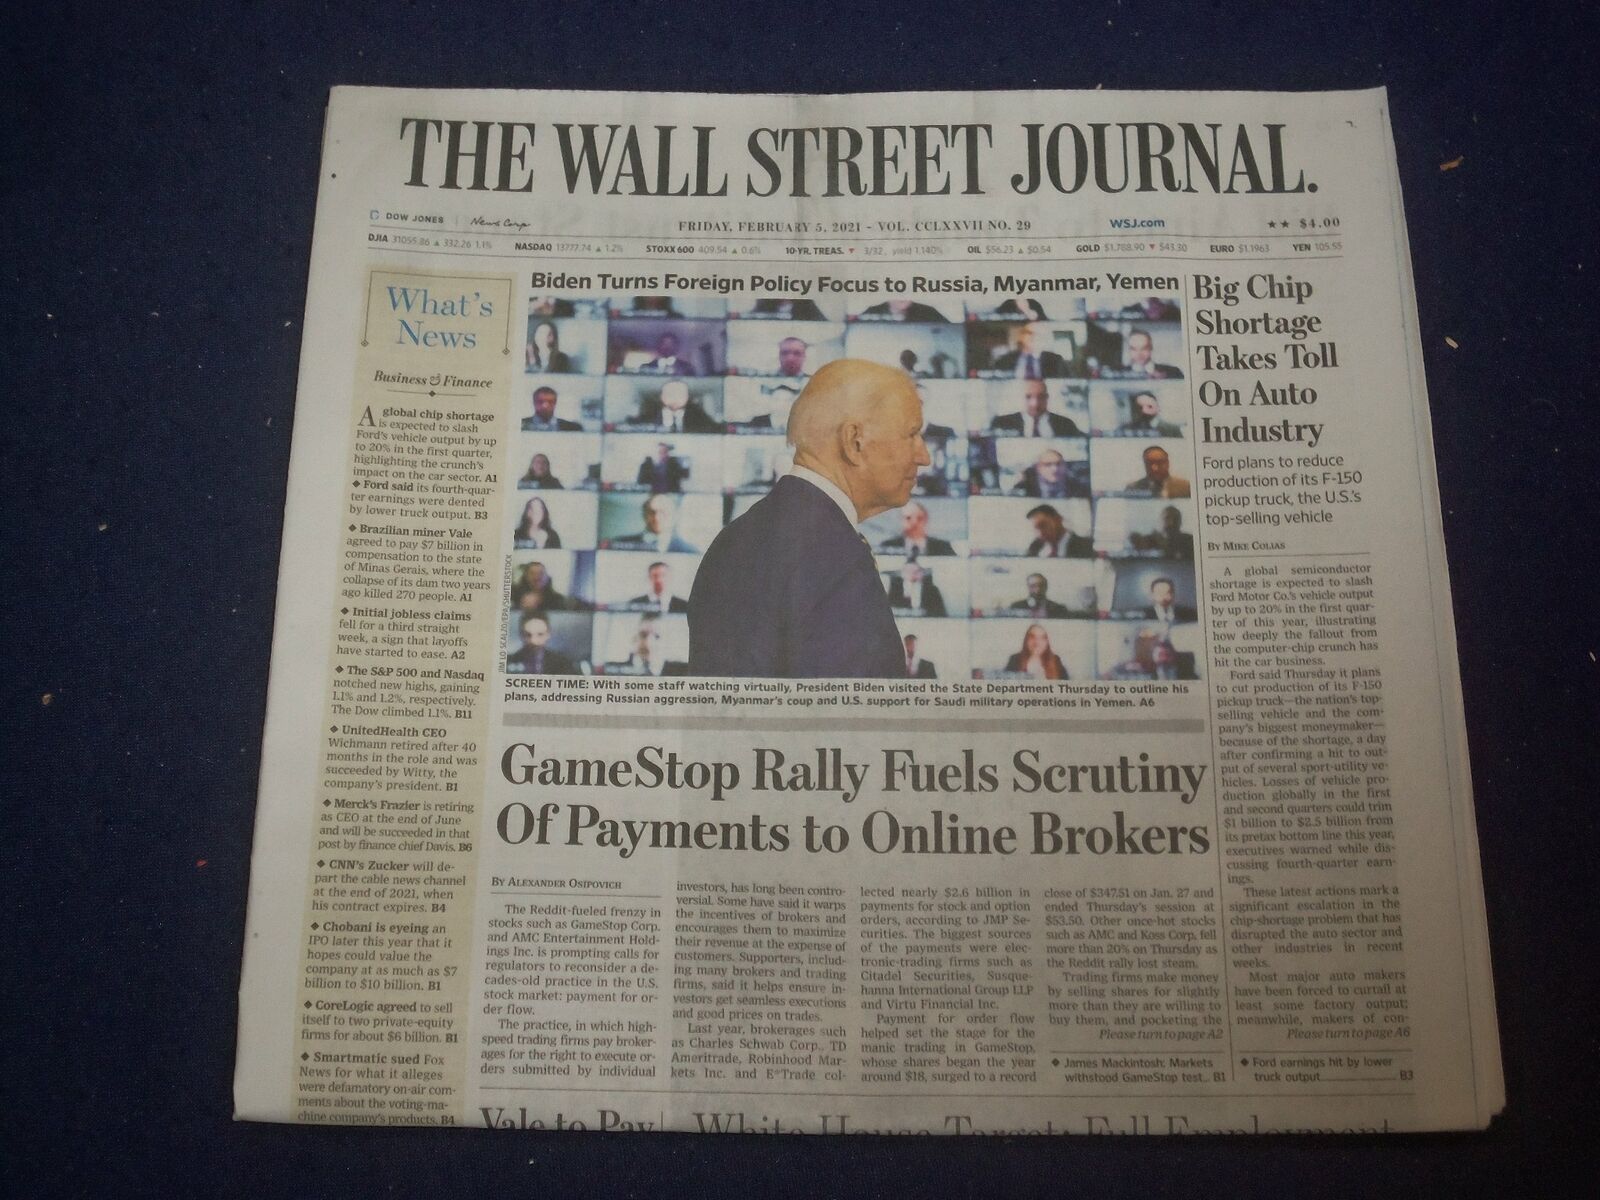 2021 FEBRUARY 5 THE WALL STREET JOURNAL - GAMESTOP RALLY FUELS SCRUTINY PAYMENTS